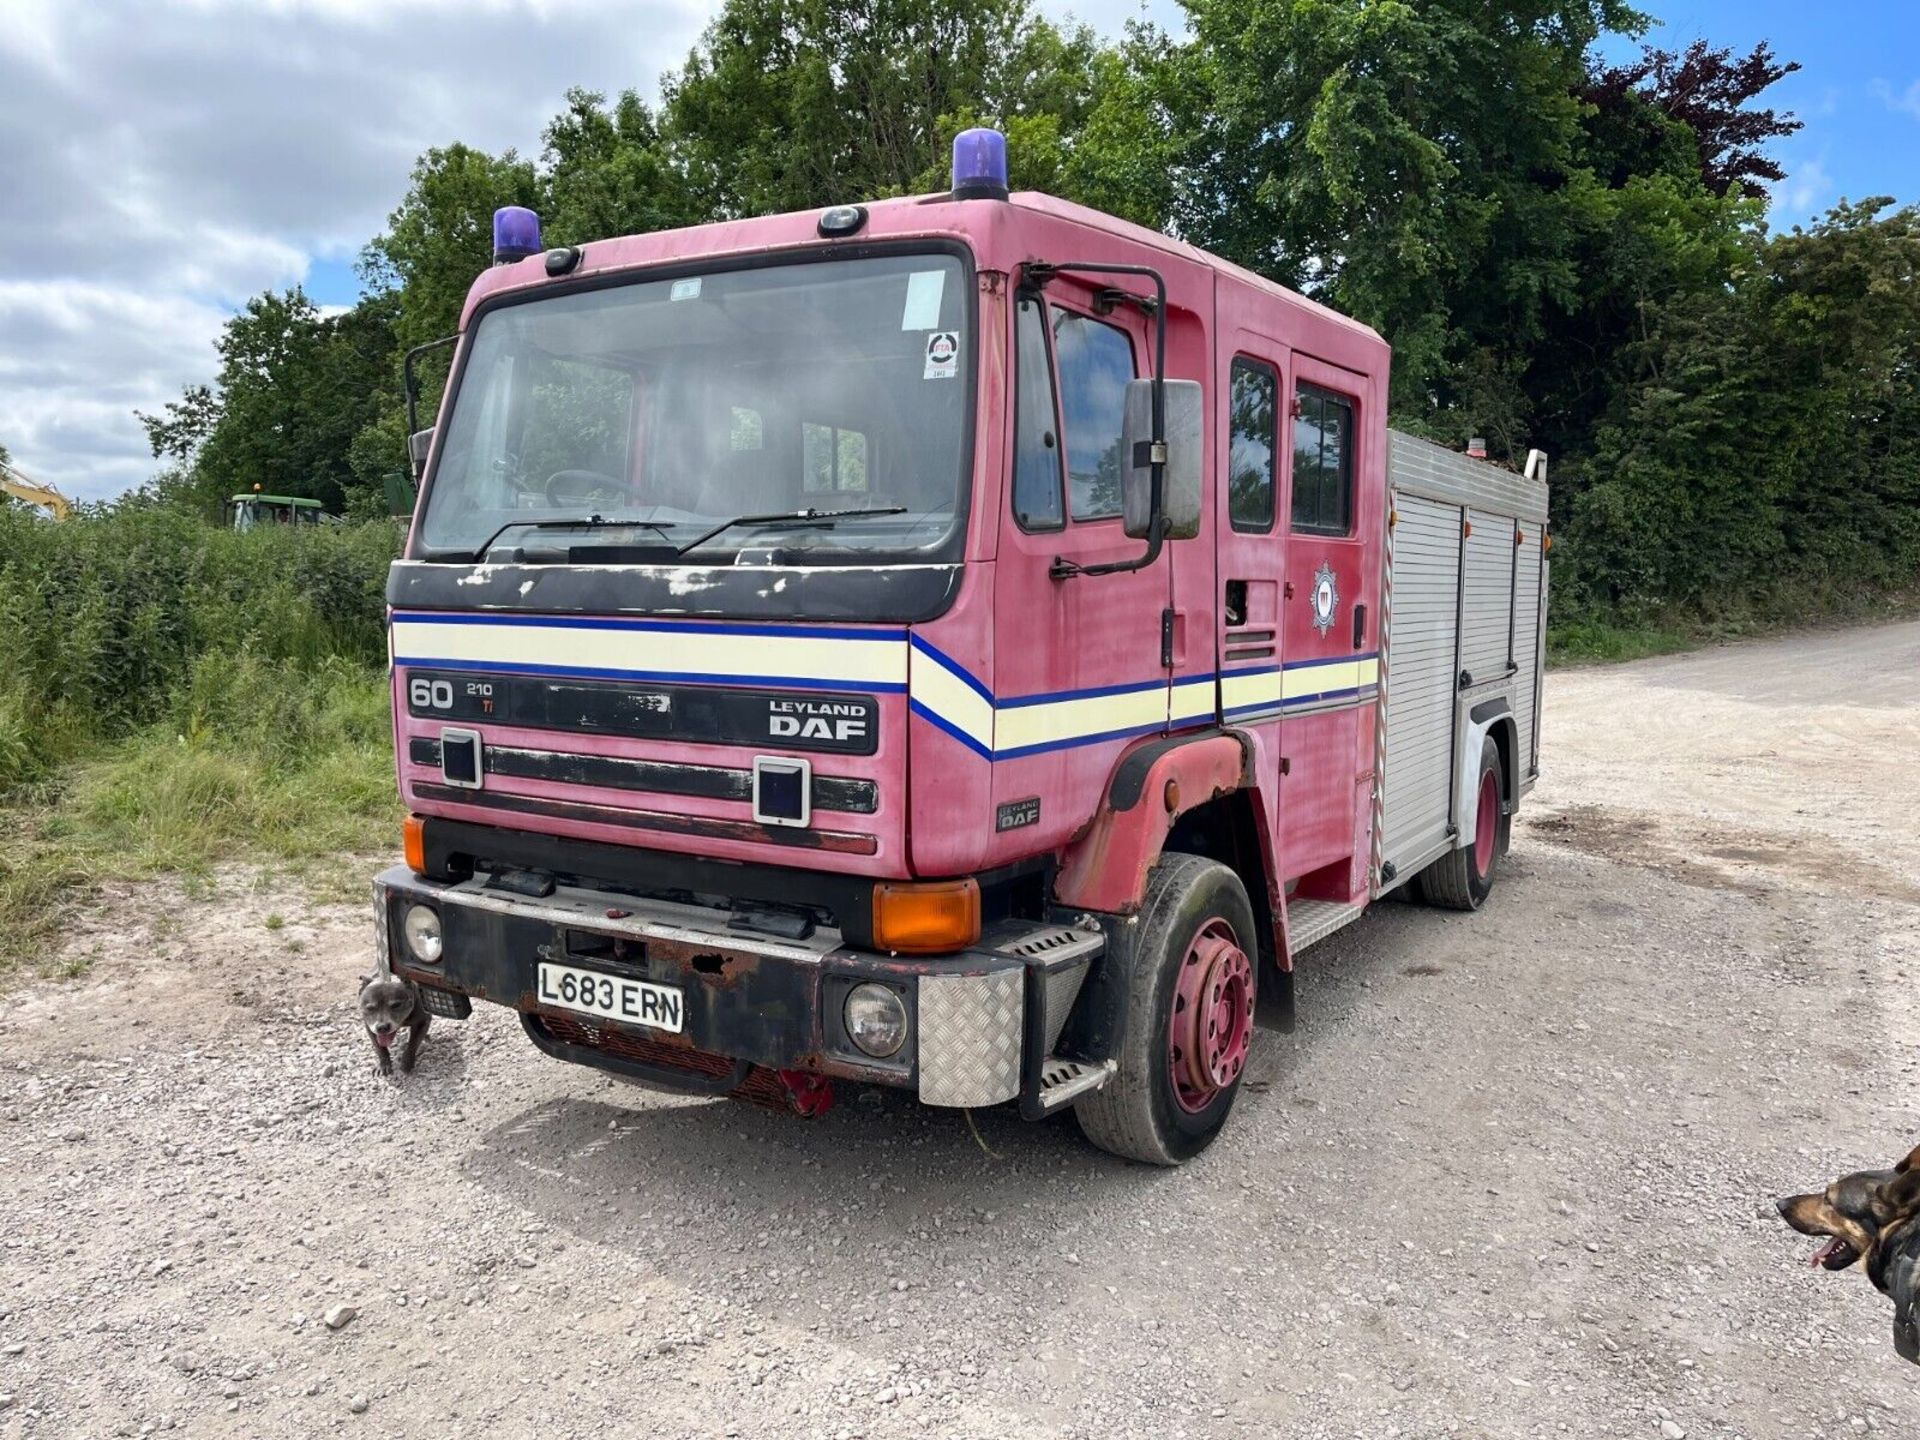 LEYLAND DAF 60 210TI FIRE ENGINE WAGON TRUCK PERKINS PHASER ENGINE 31174 MILES - Image 2 of 15